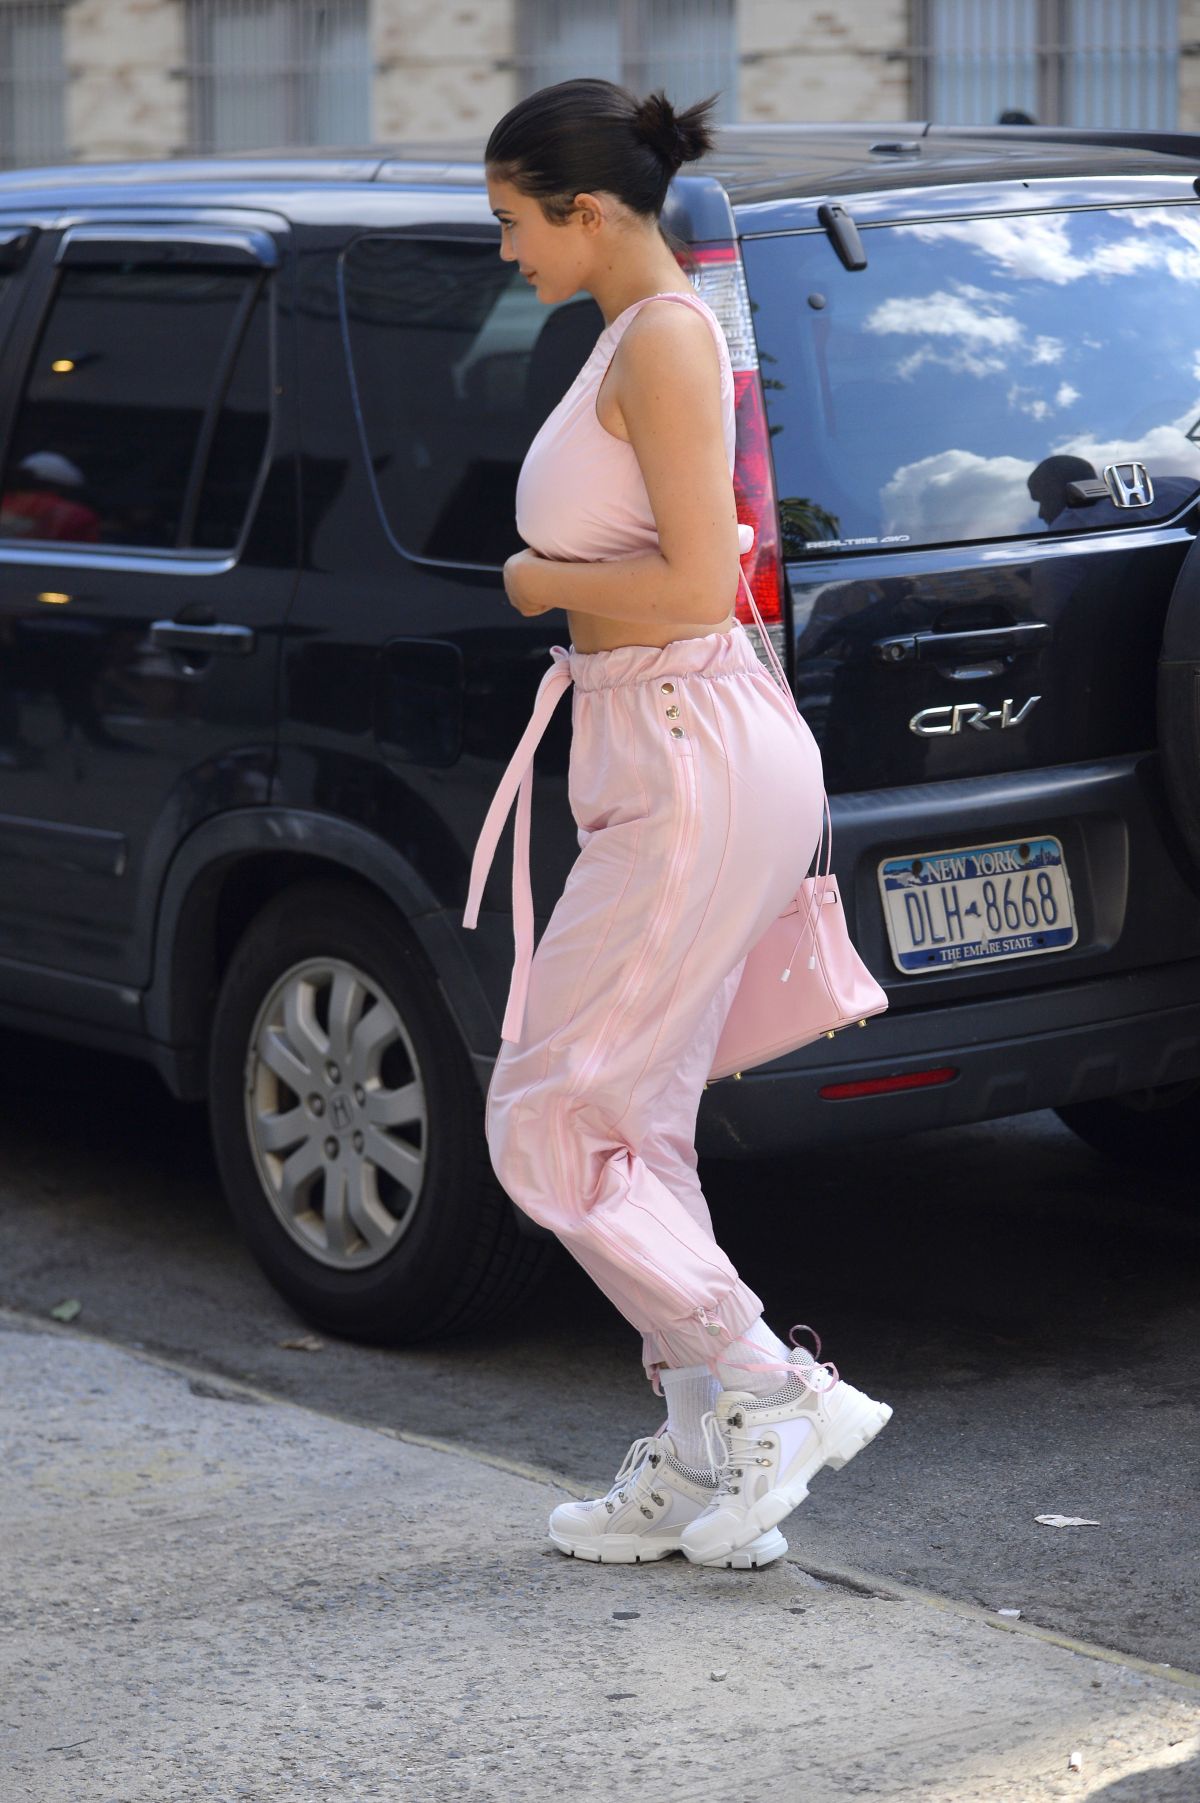 Kylie Jenner Shopping at Chrome Hearts July 18, 2018 – Star Style